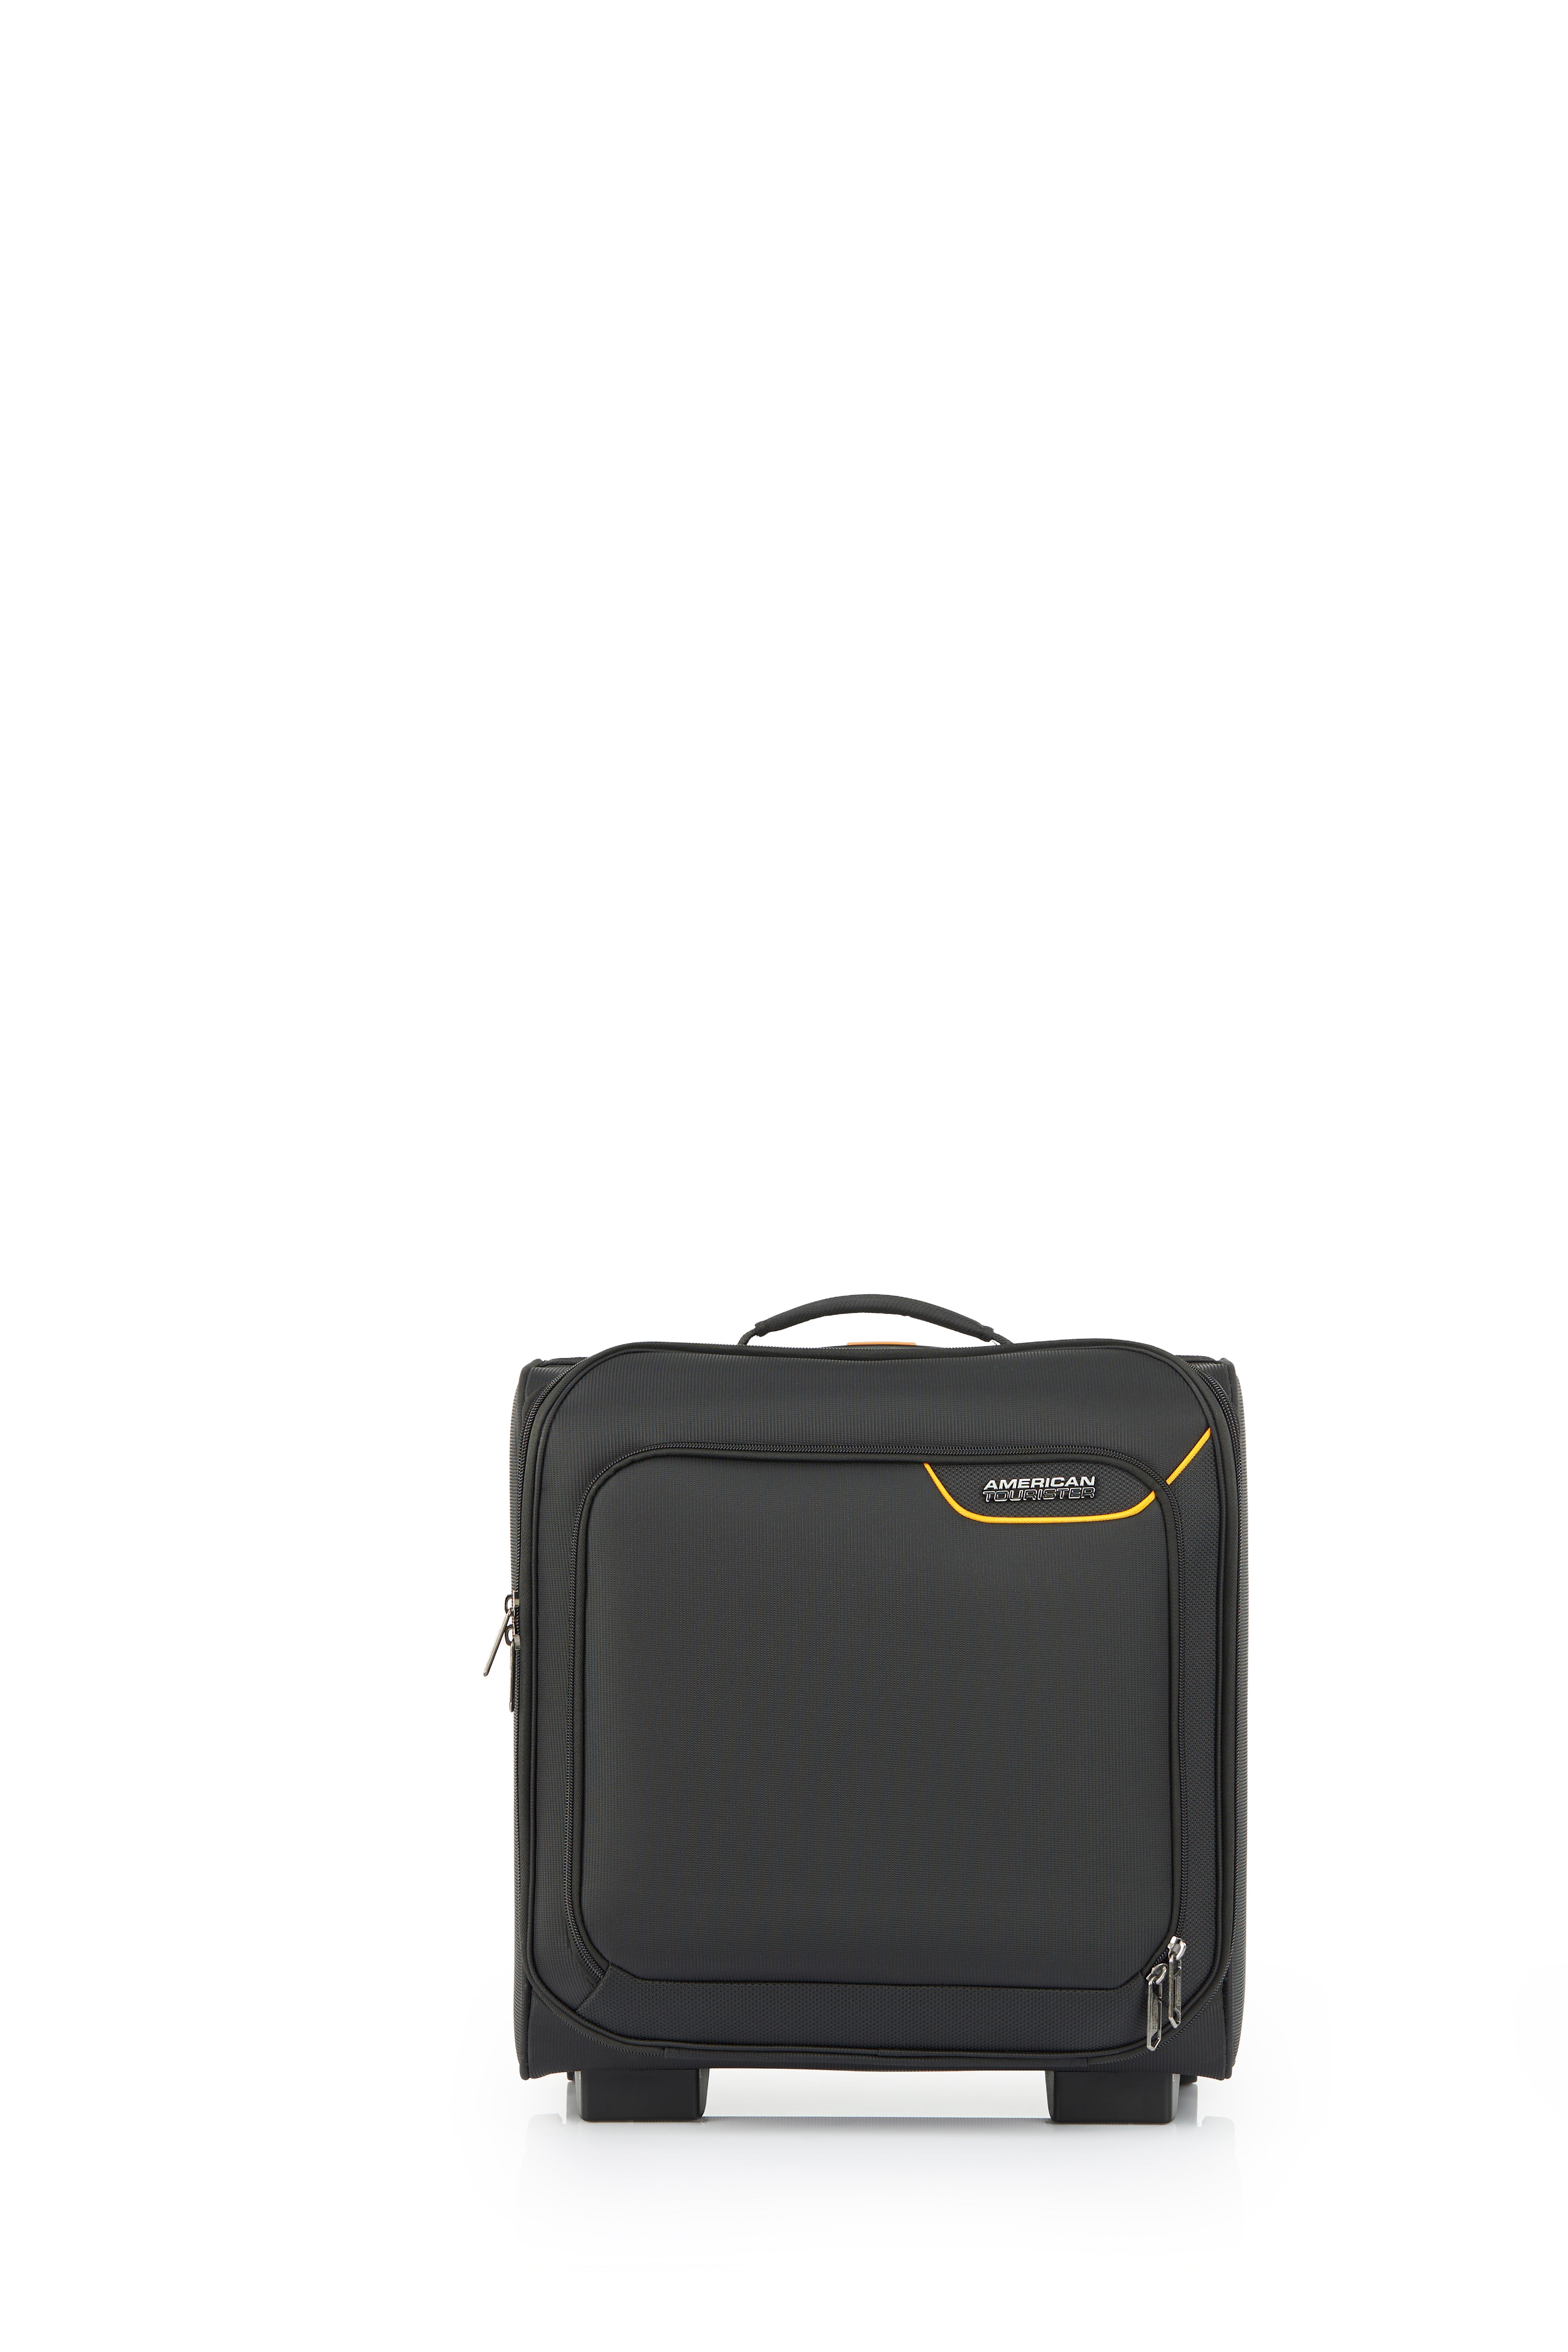 American Tourister - Applite ECO Underseater Suitcase - Black/Must - 0